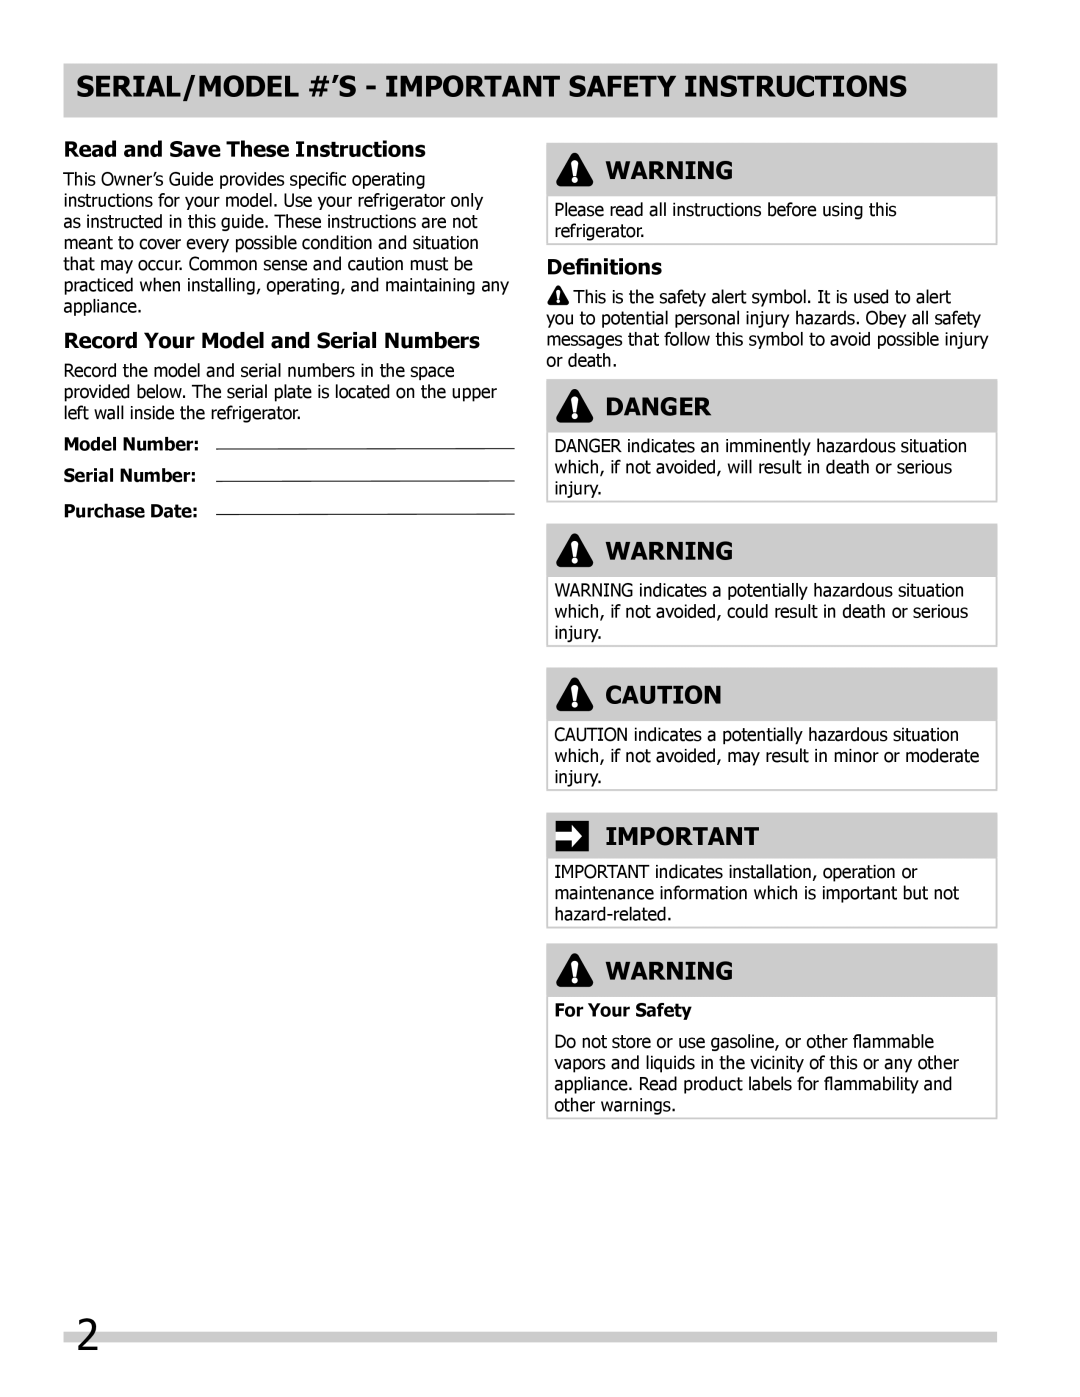 Frigidaire FFPH31M6LM SERIAL/MODEL #’S - Important Safety Instructions, Danger, Read and Save These Instructions 